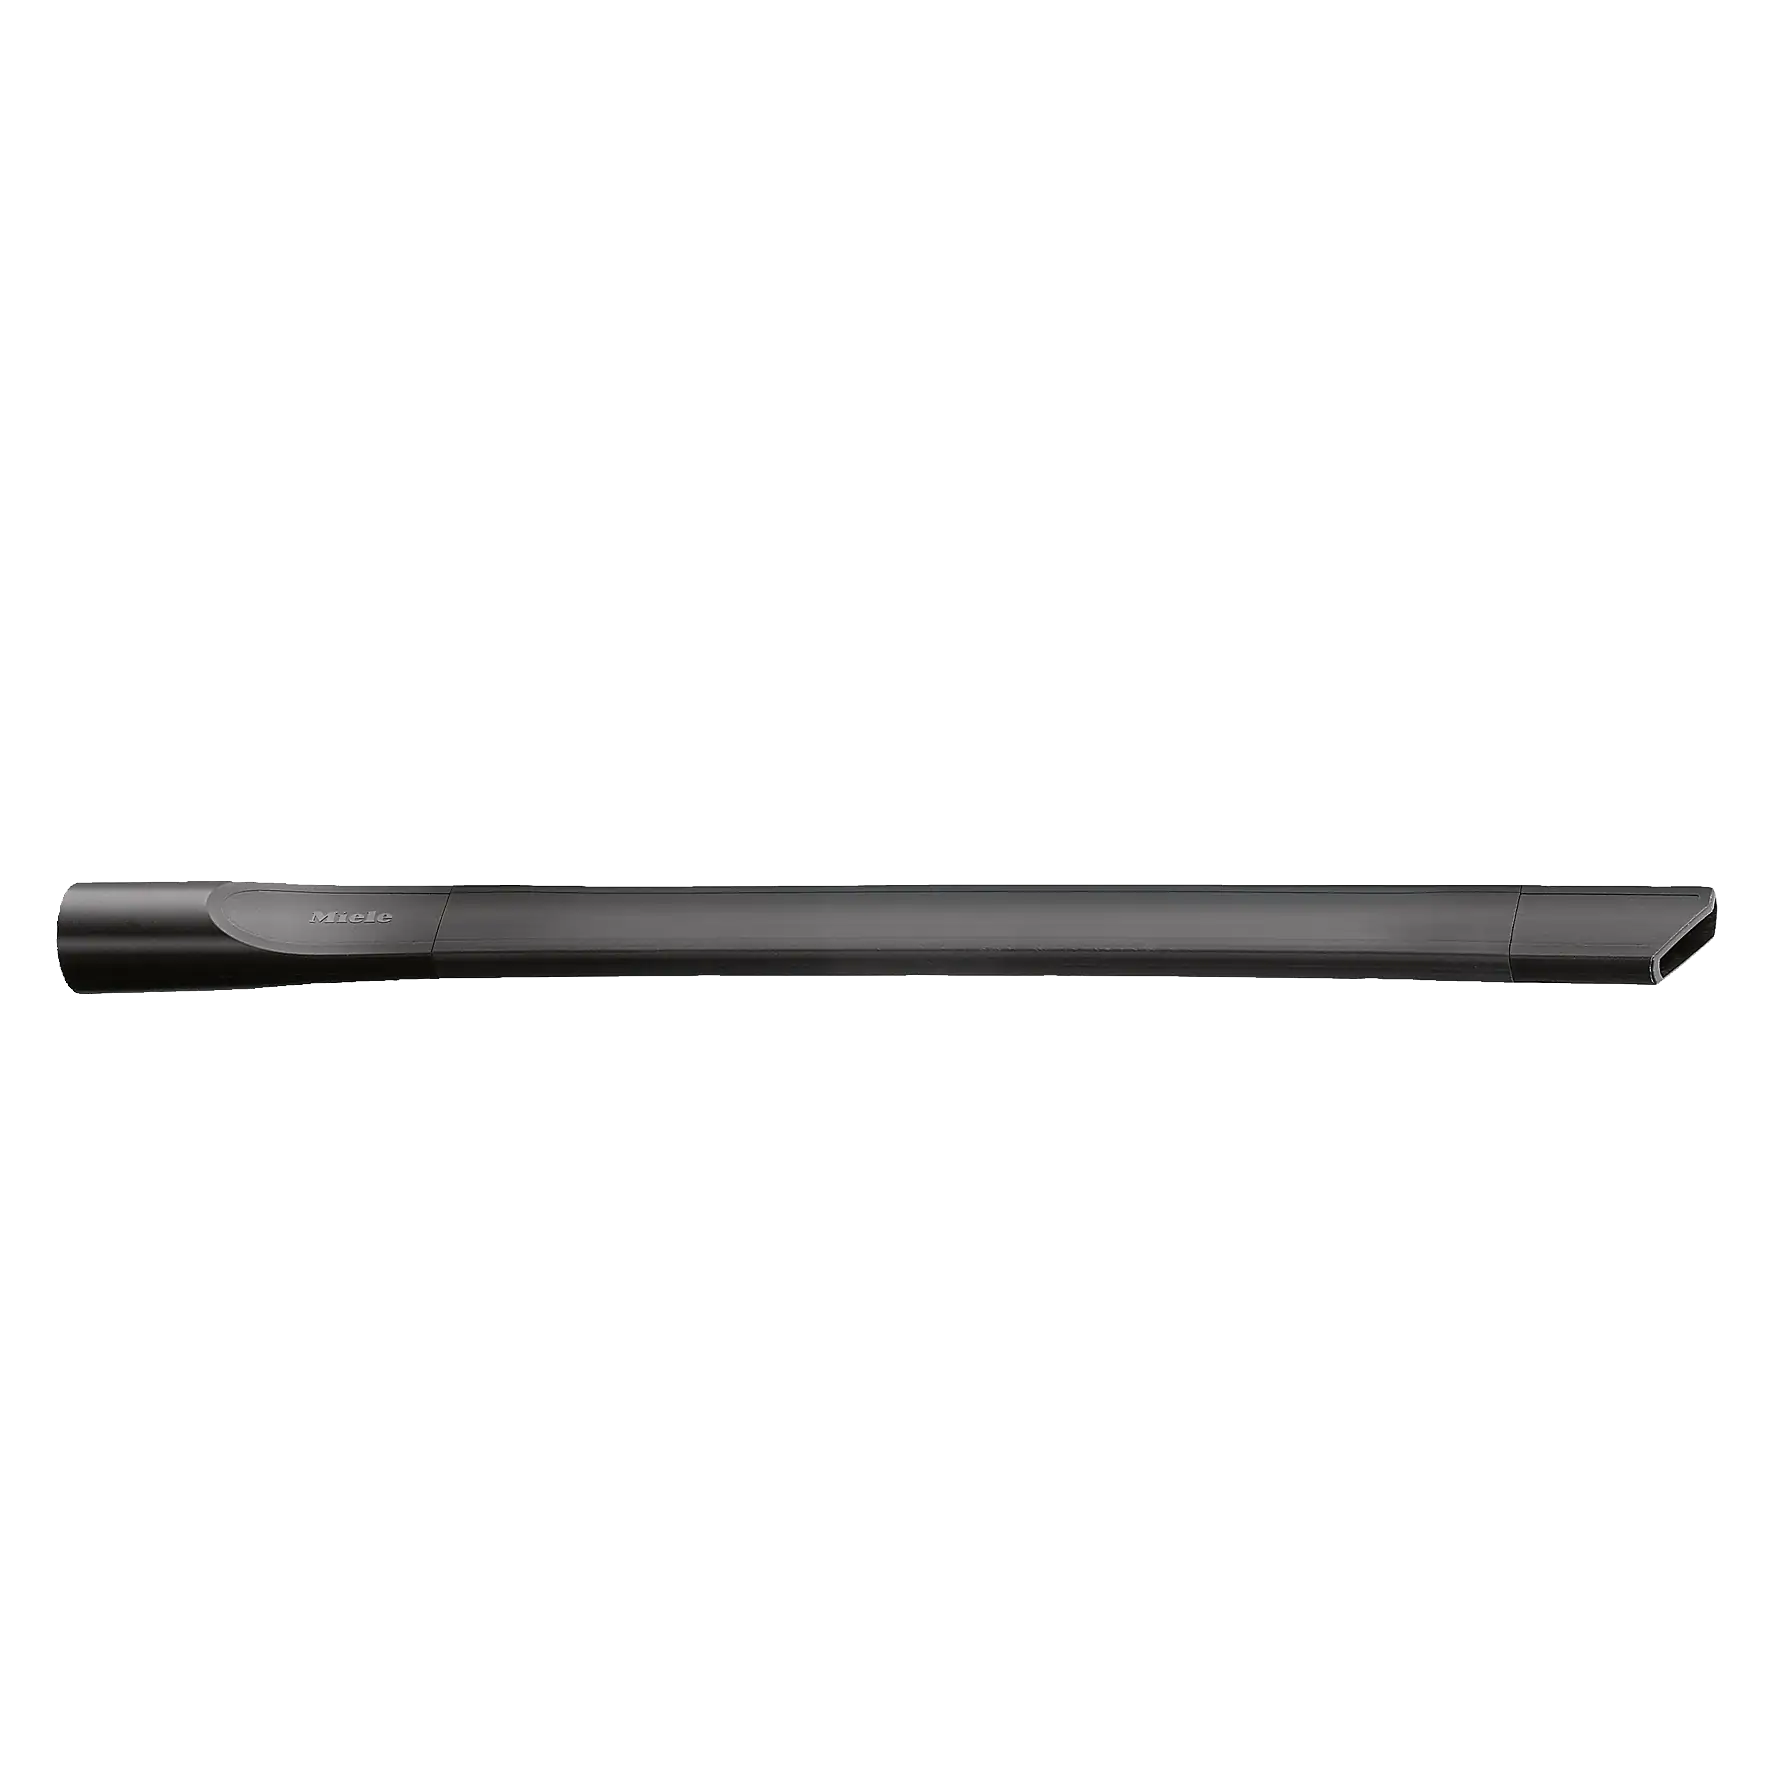 Miele SFD 20 Extended Flexible Crevice Tool